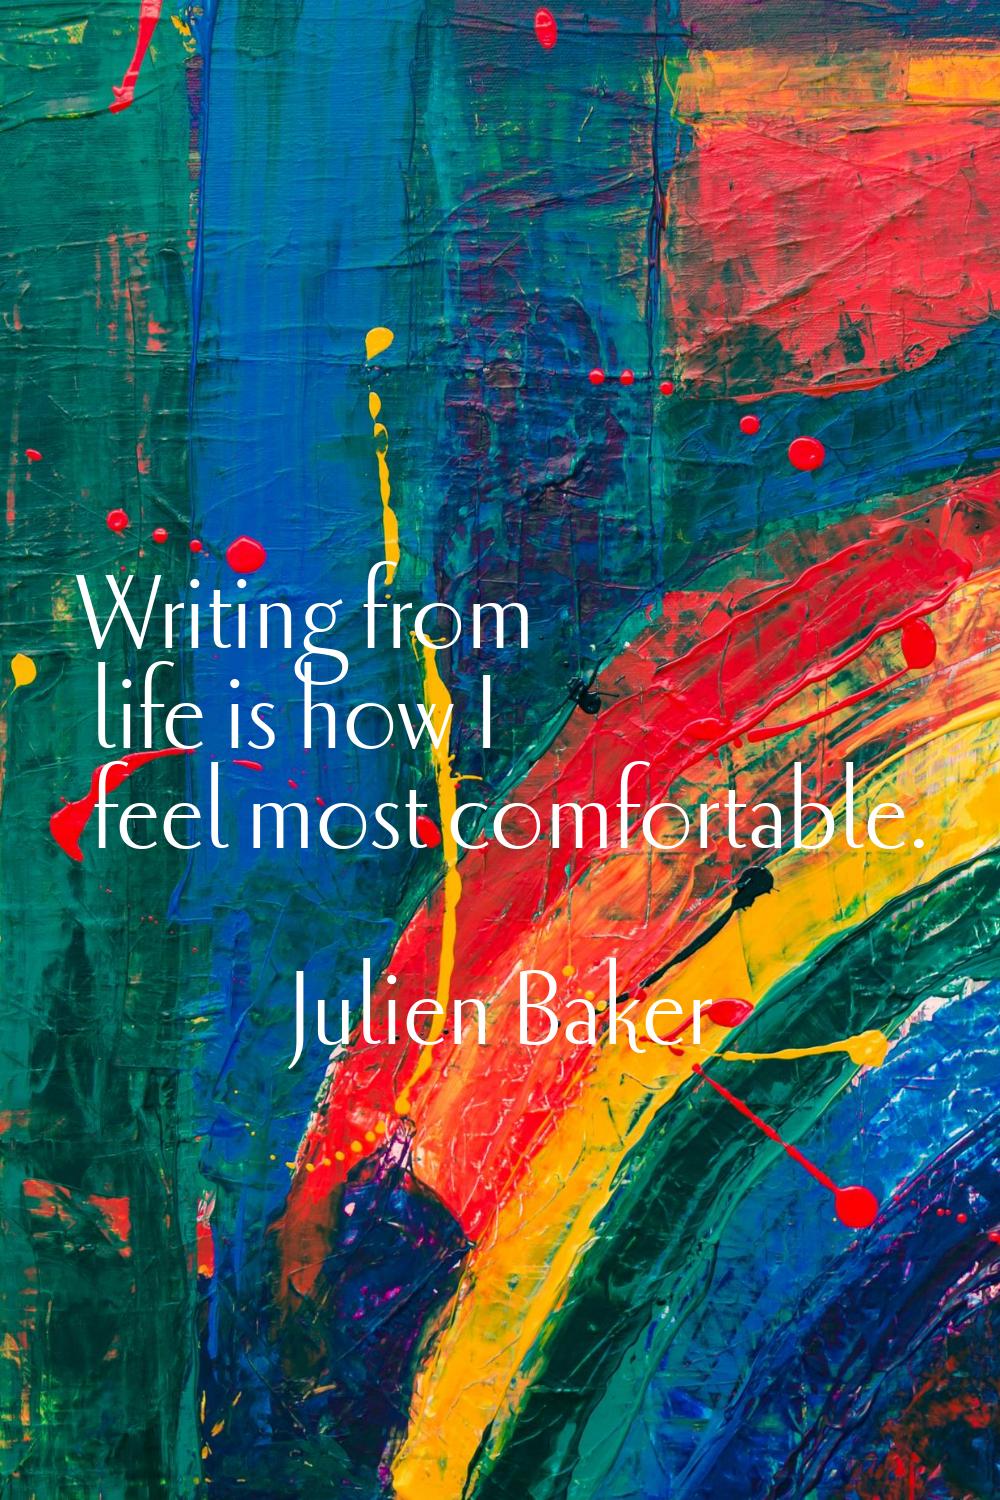 Writing from life is how I feel most comfortable.